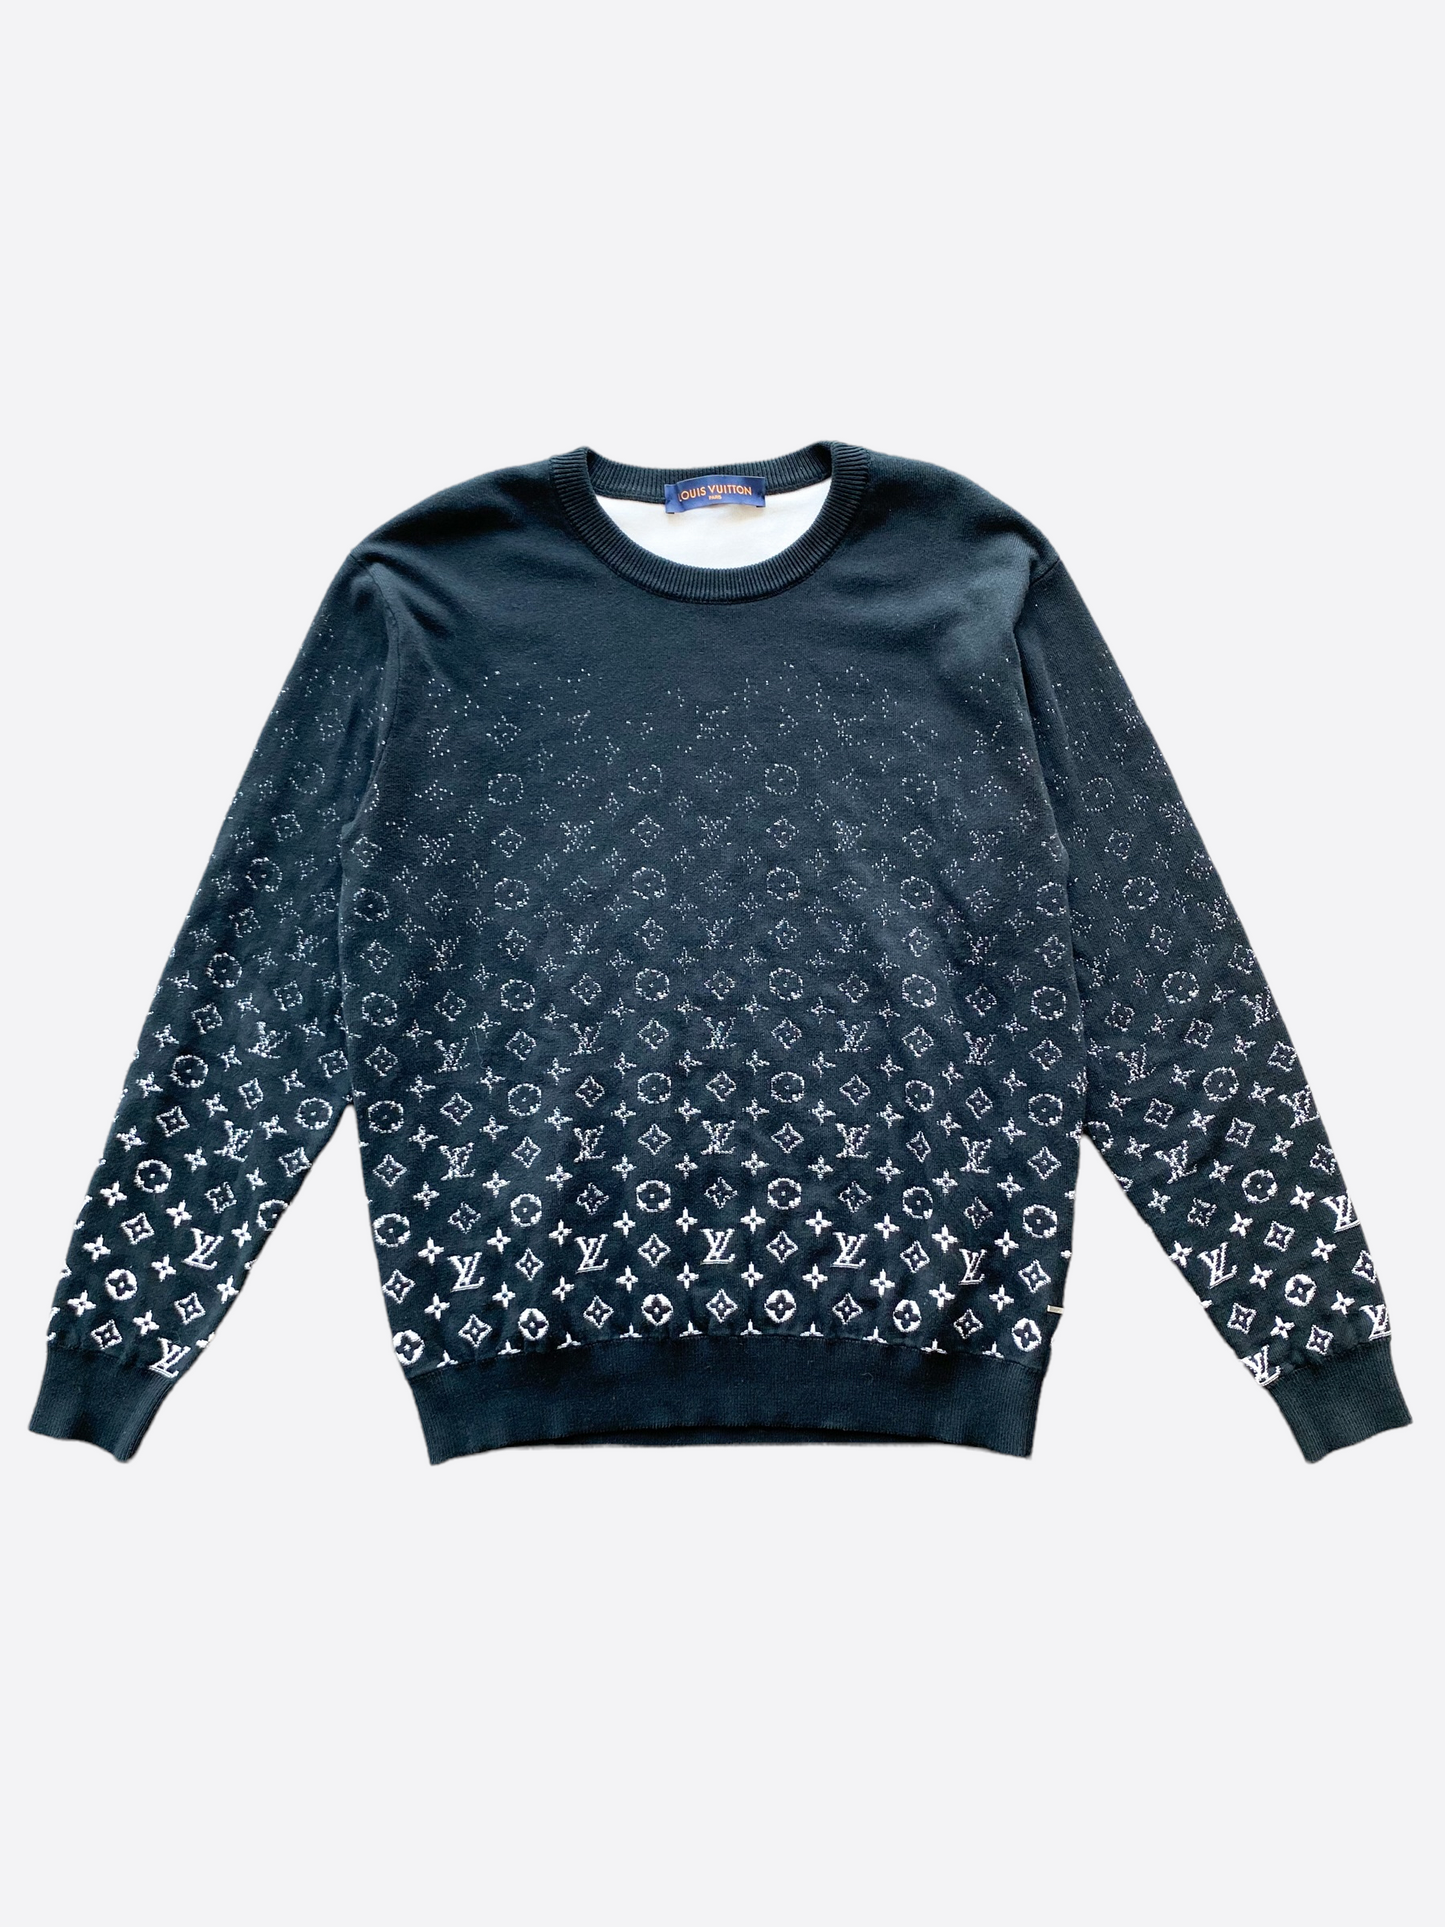 Valmerosa Fashion - It gets better every time you look at it Louis Vuitton  Gradient Monogram Sweatshirt - Bleu Canard. The perfect sweater for every  season. Black Friday sales are still live